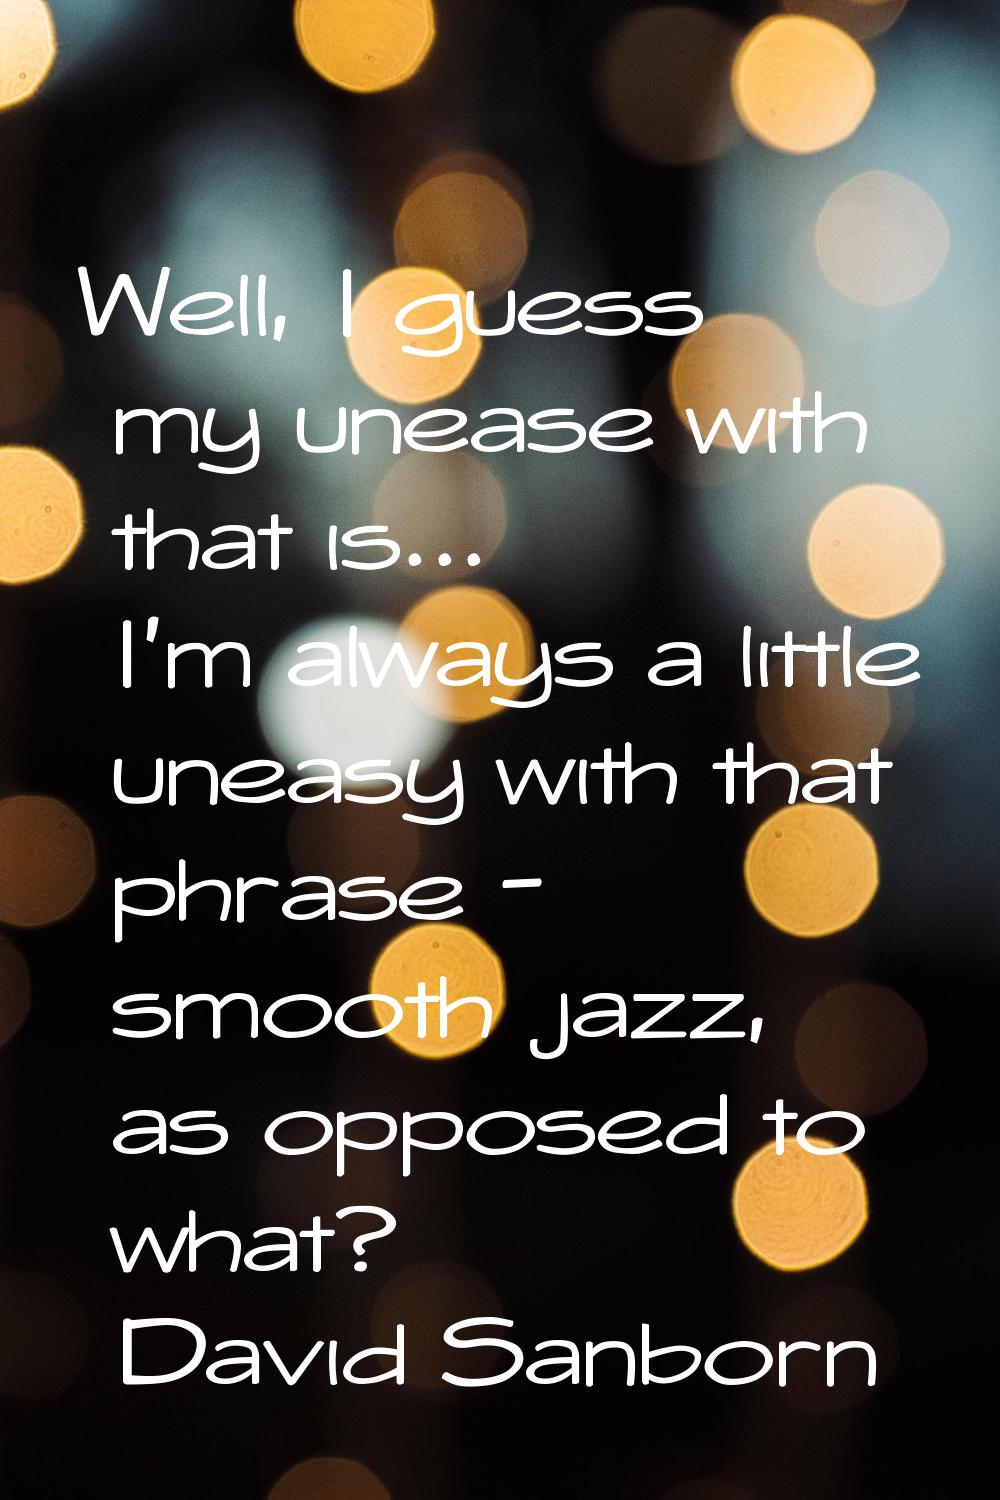 Well, I guess my unease with that is... I'm always a little uneasy with that phrase - smooth jazz, 